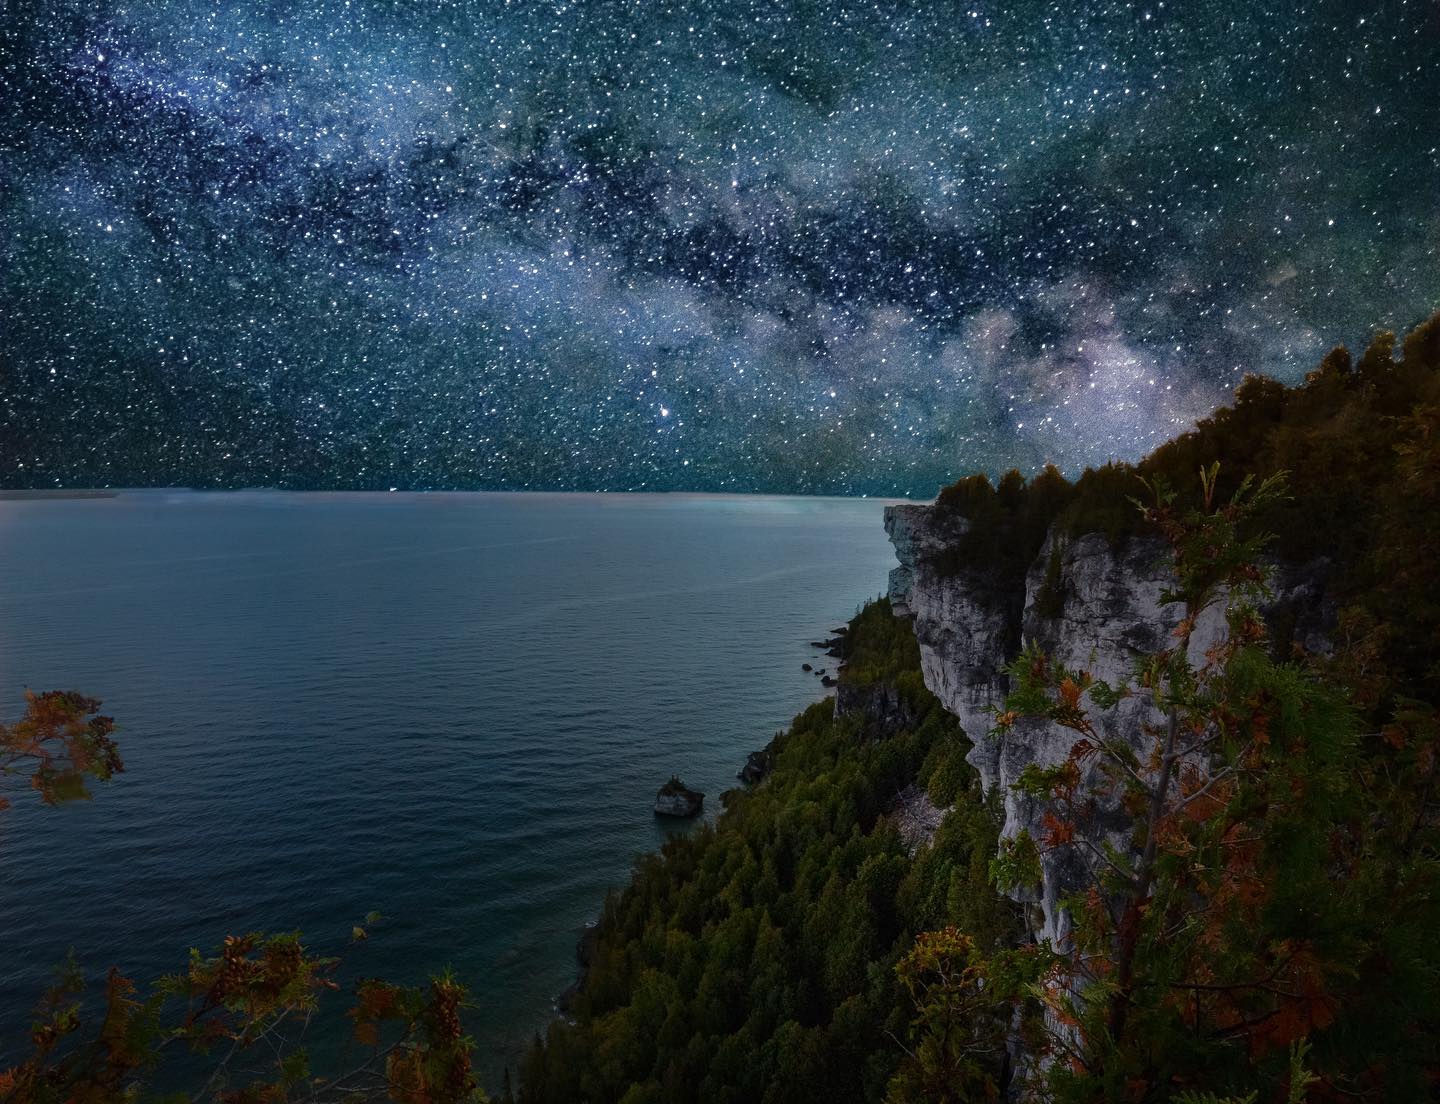 photo of the milky way in the night sky over Georgian Bay